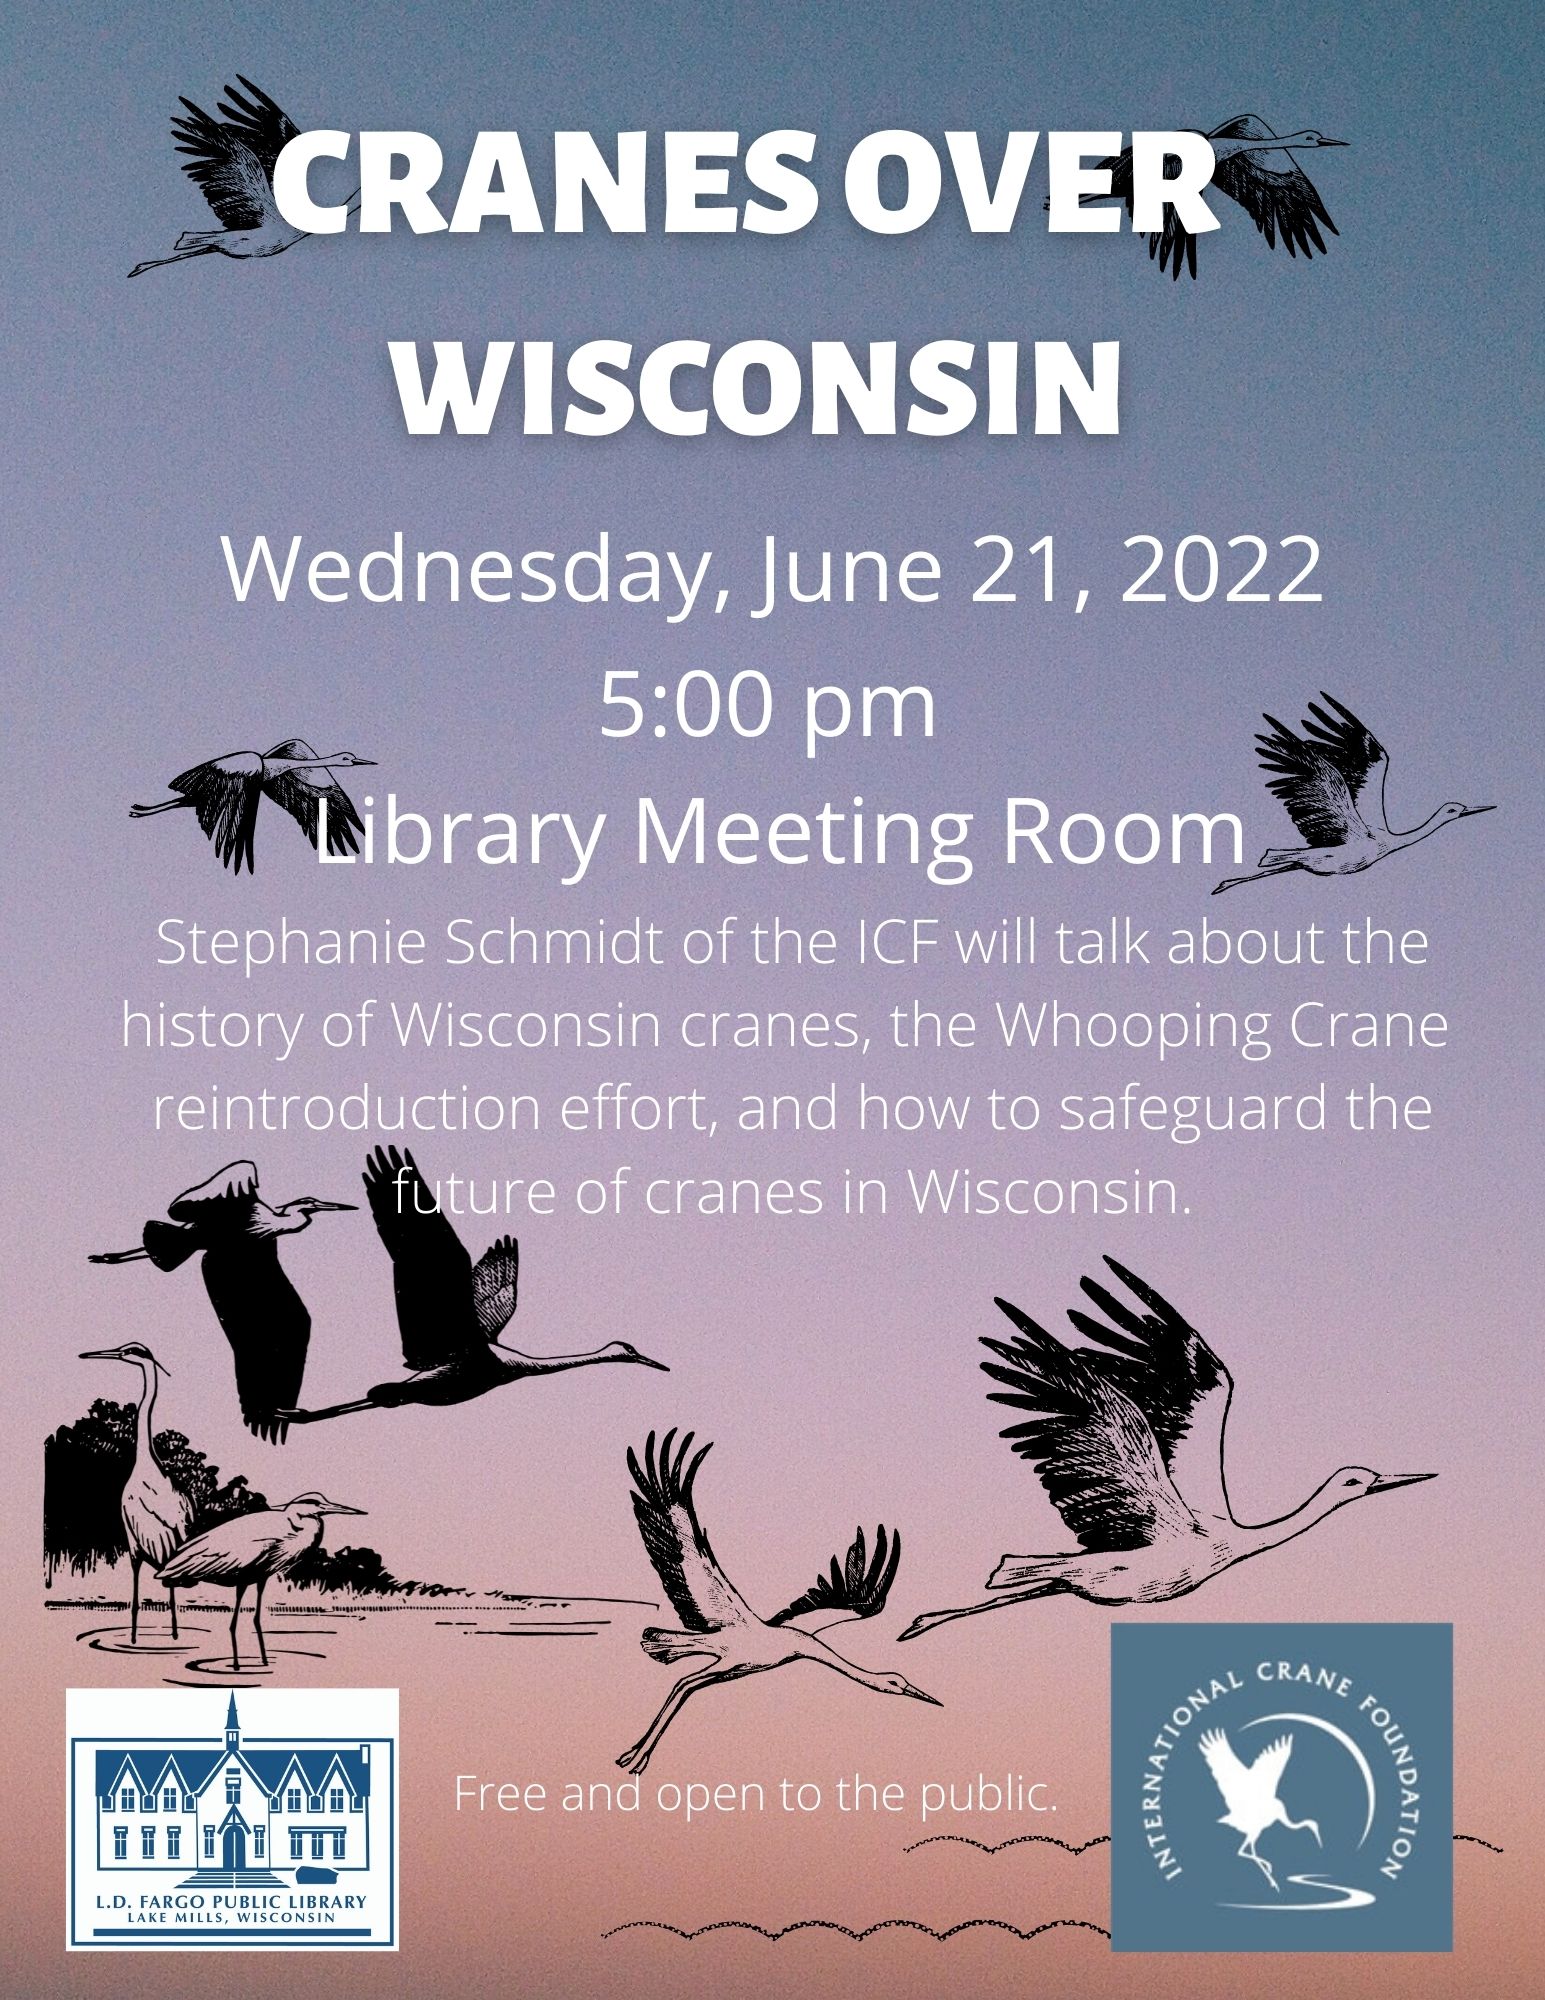 Cranes Over Wisconsin.  Wednesday, June 21, 2022 5:00 PM. Stephanie Schmidt of the ICF will talk about the history of Wisconsin cranes, the Whooping Crane  reintroduction effort, and how to safeguard the future of cranes in Wisconsin.